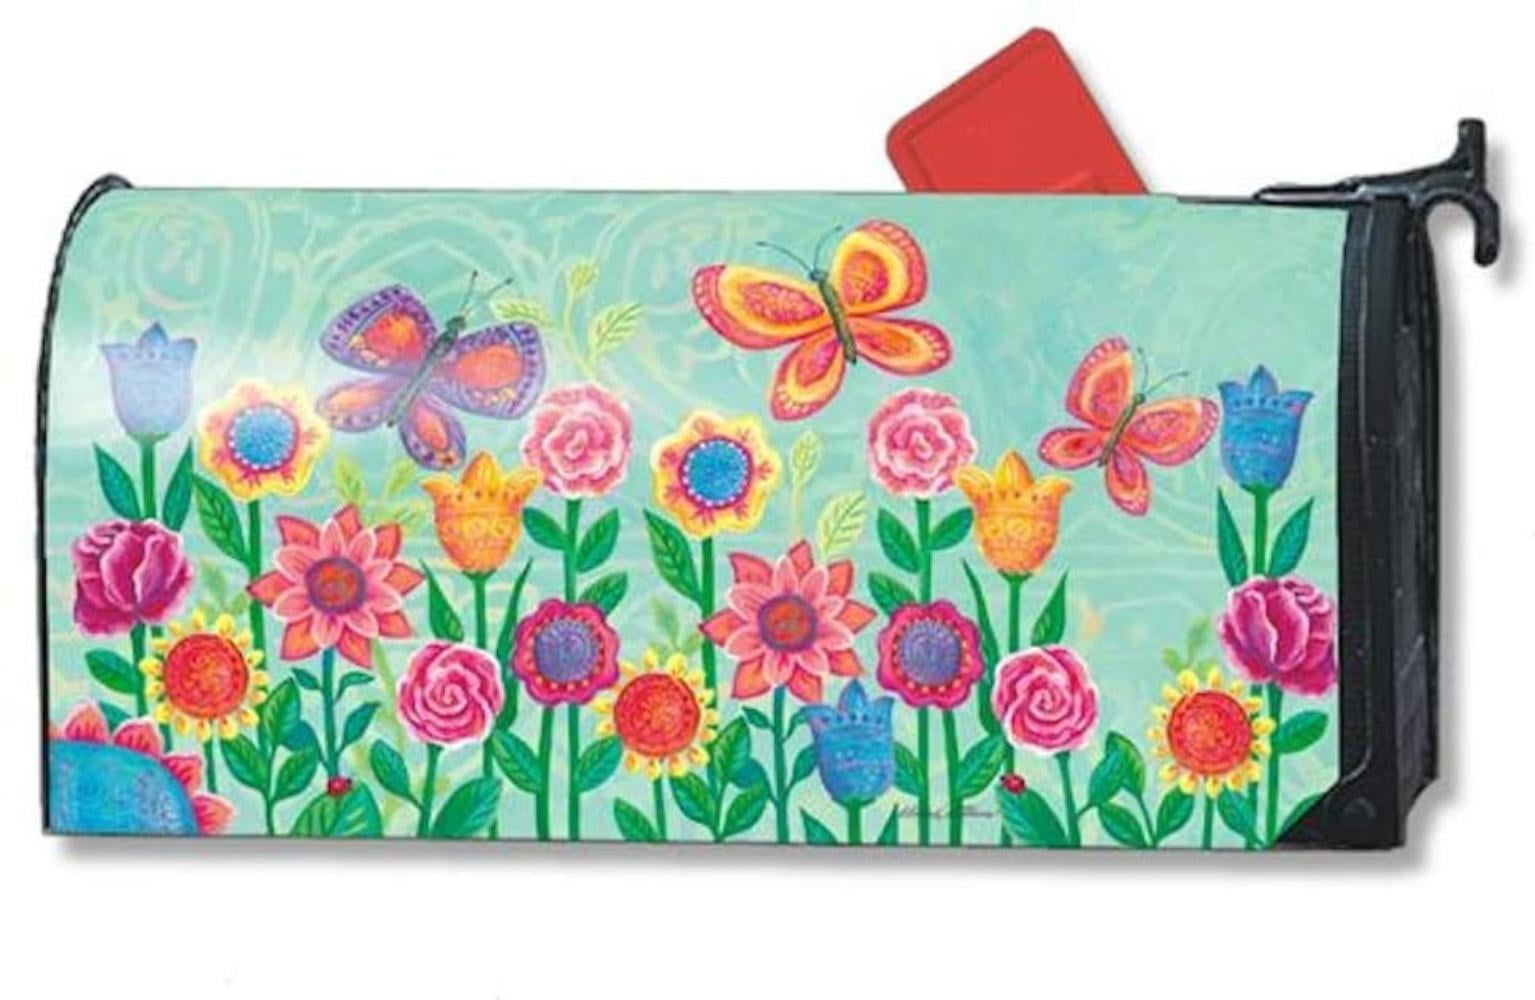 BreezeArt Mailwraps BE MINE BIRDS Magnetic Mailbox Cover by Magnet Works 